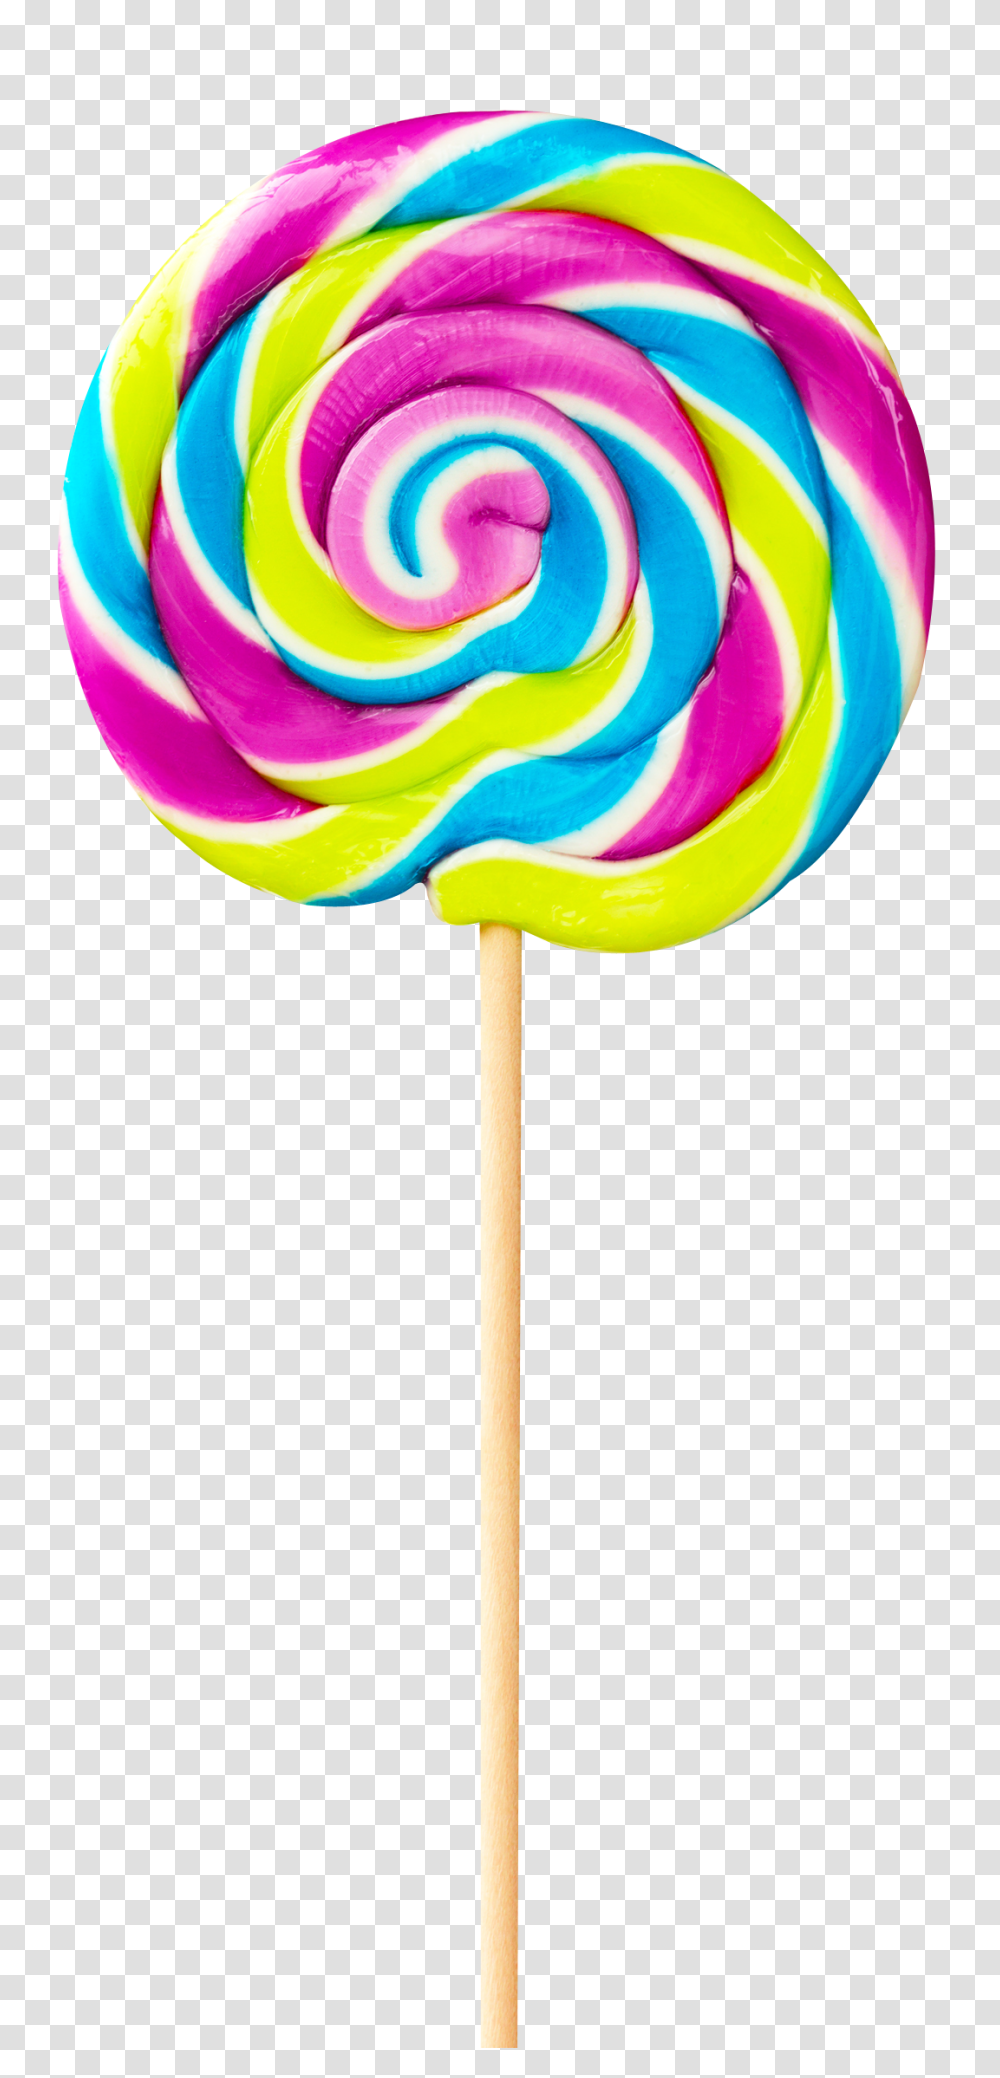 Lollipop Image, Food, Candy, Balloon, Sweets Transparent Png